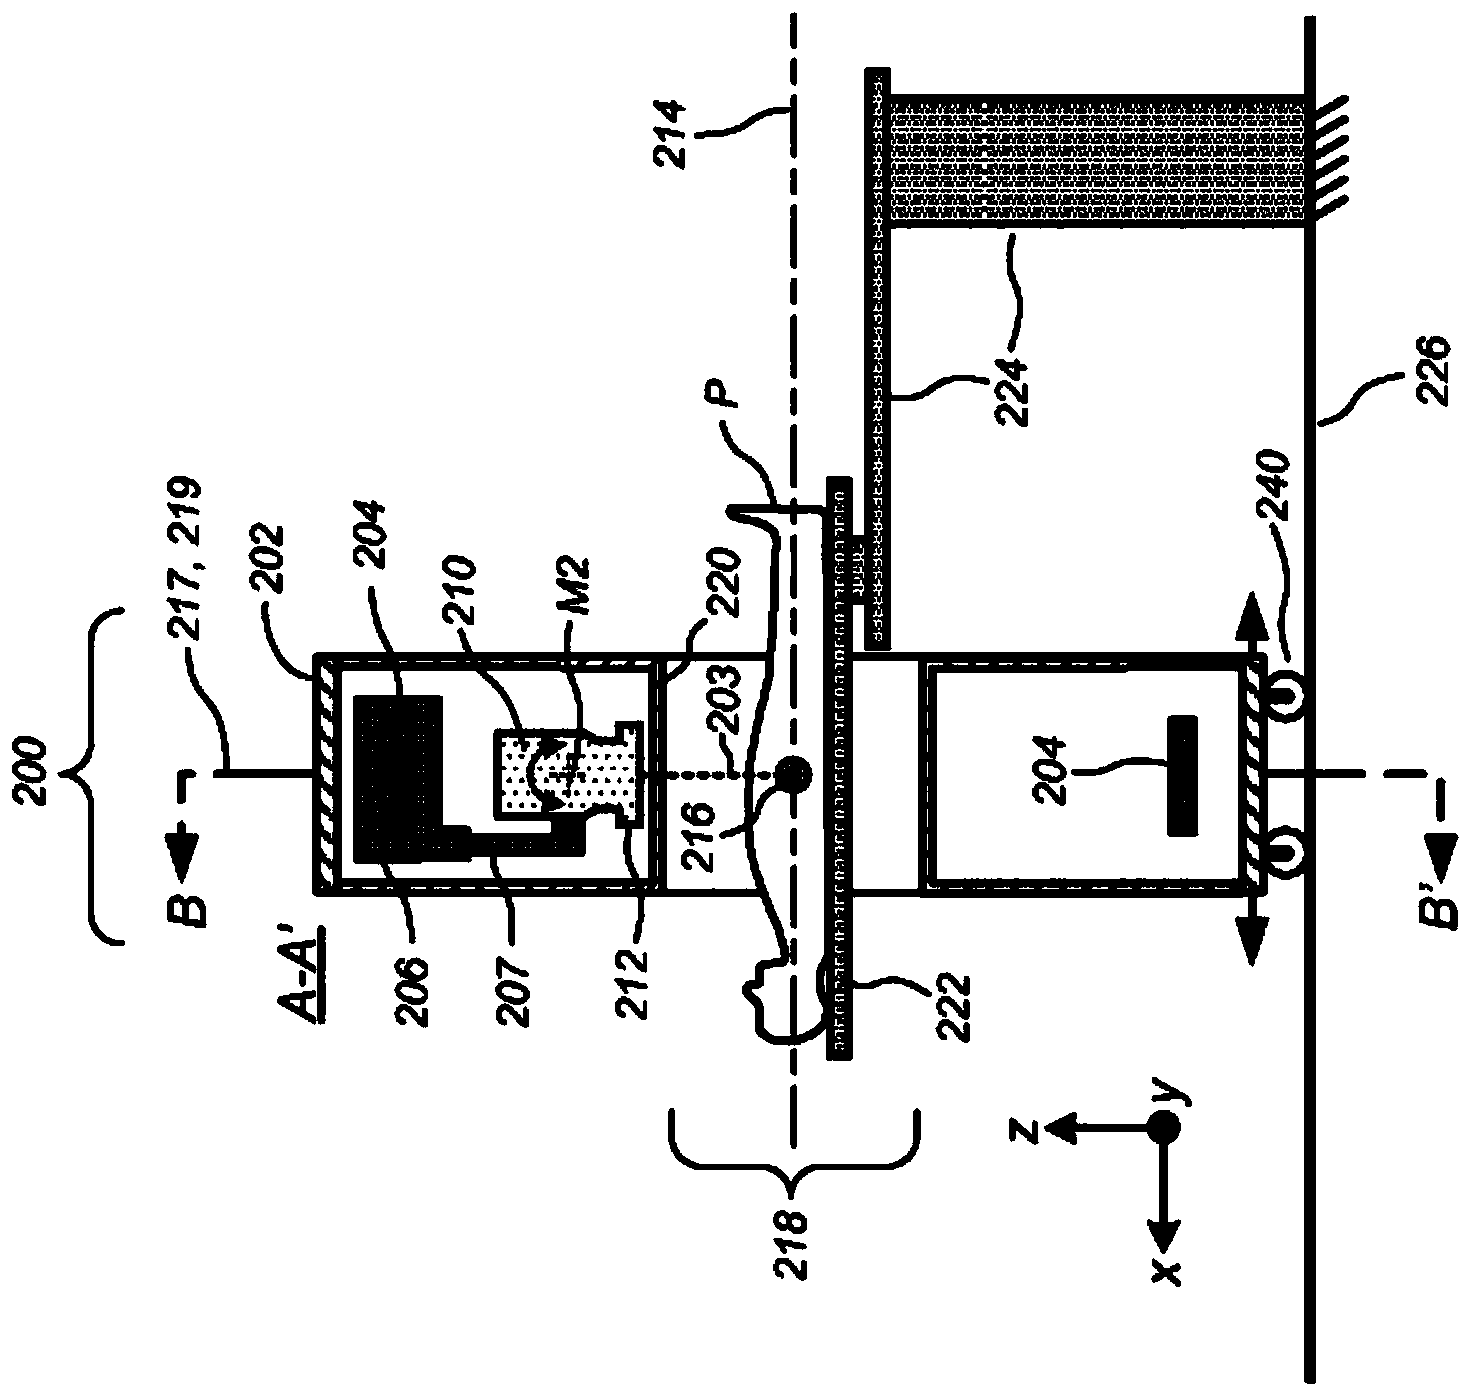 Radiation treatment delivery system with ring gantry